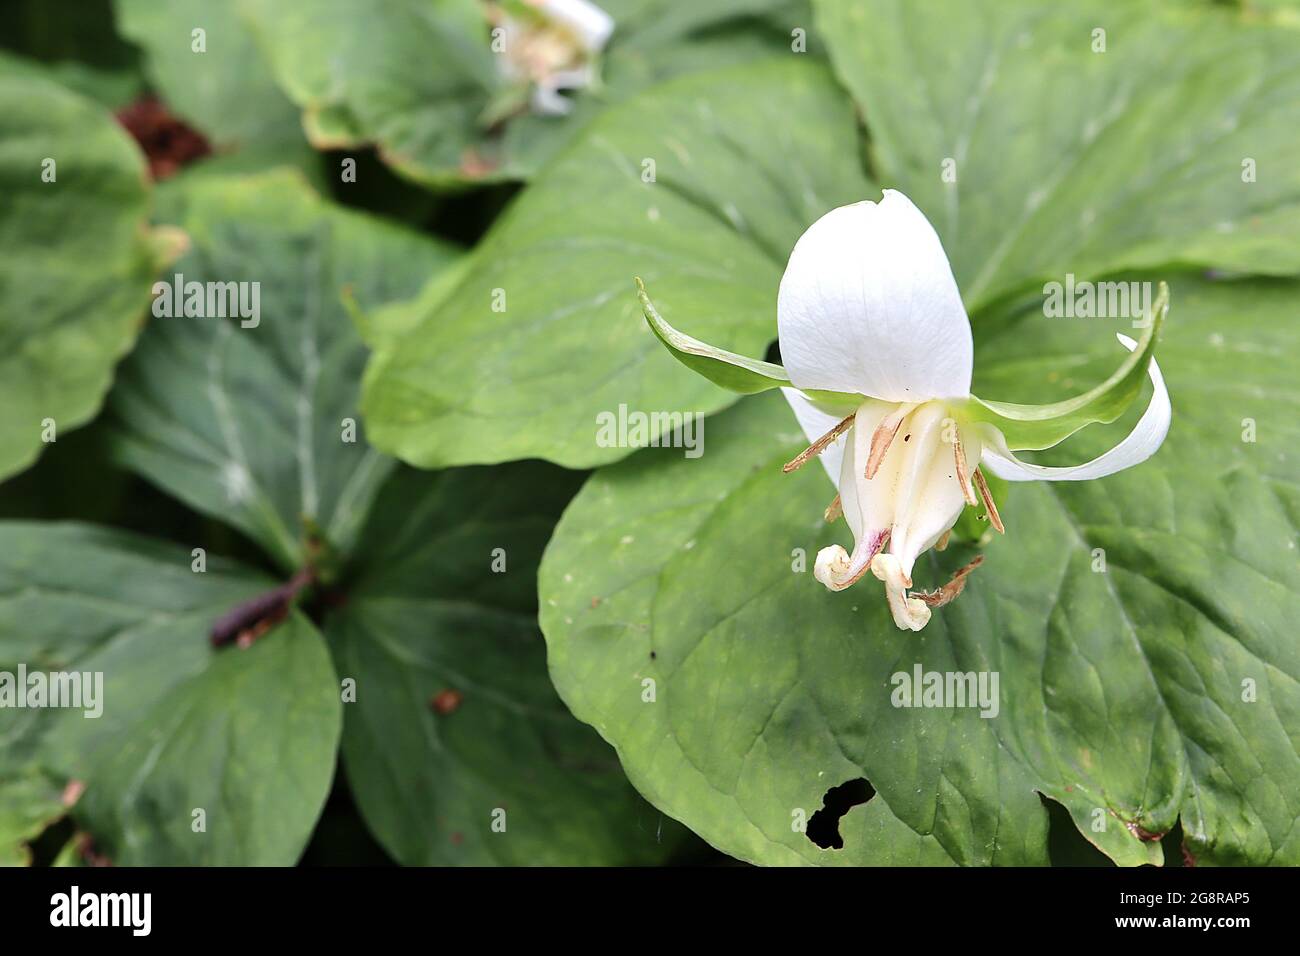 Trillium flexipes nodding wakerobin – white wide-pointed petals, flared green sepals, large ovary, very broad ovate leaves,  May, England, UK Stock Photo